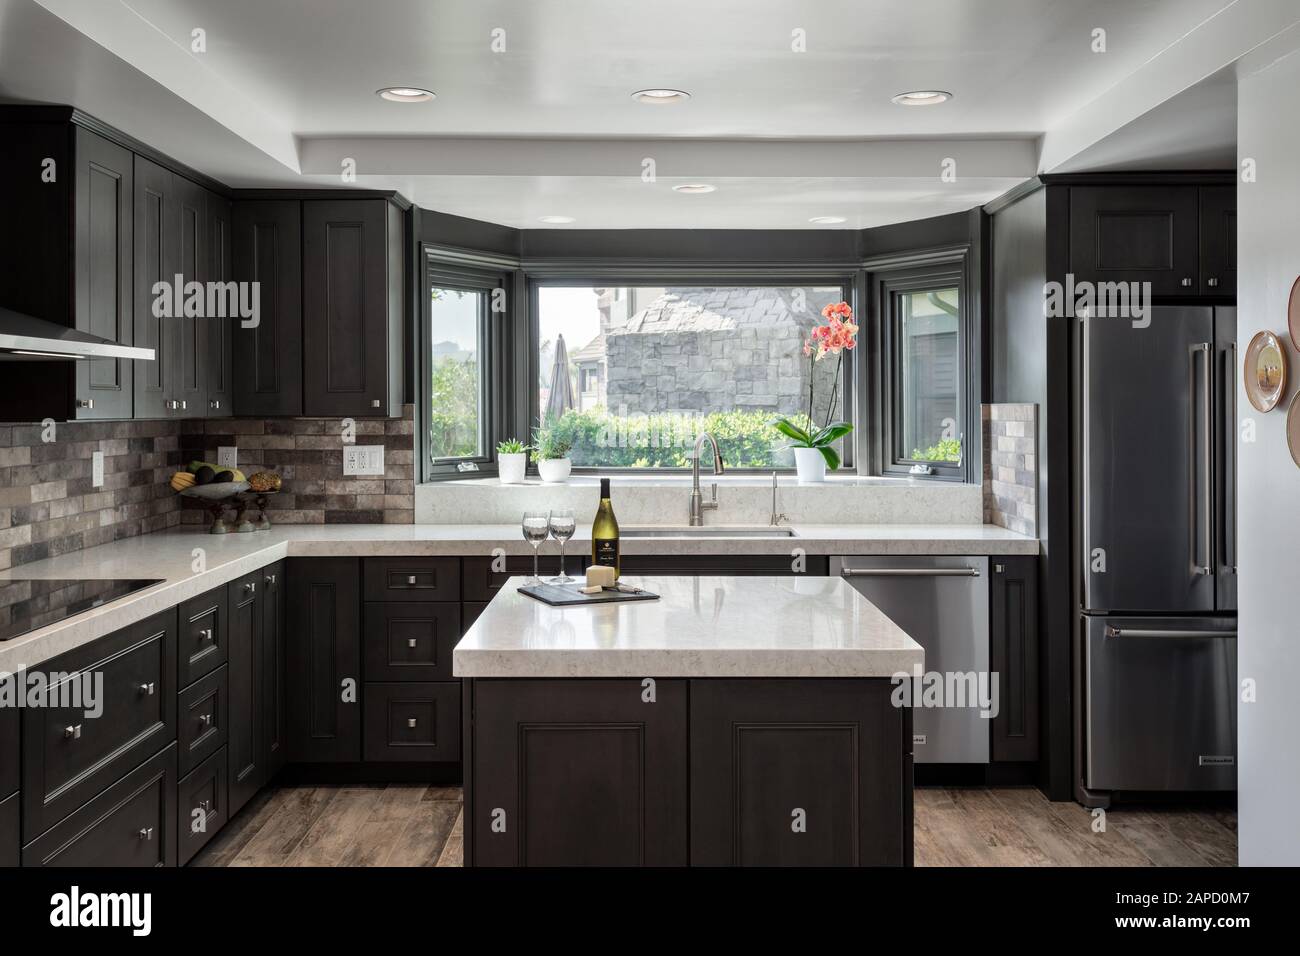 Remodeled kitchen with dark cabinets and island Stock Photo